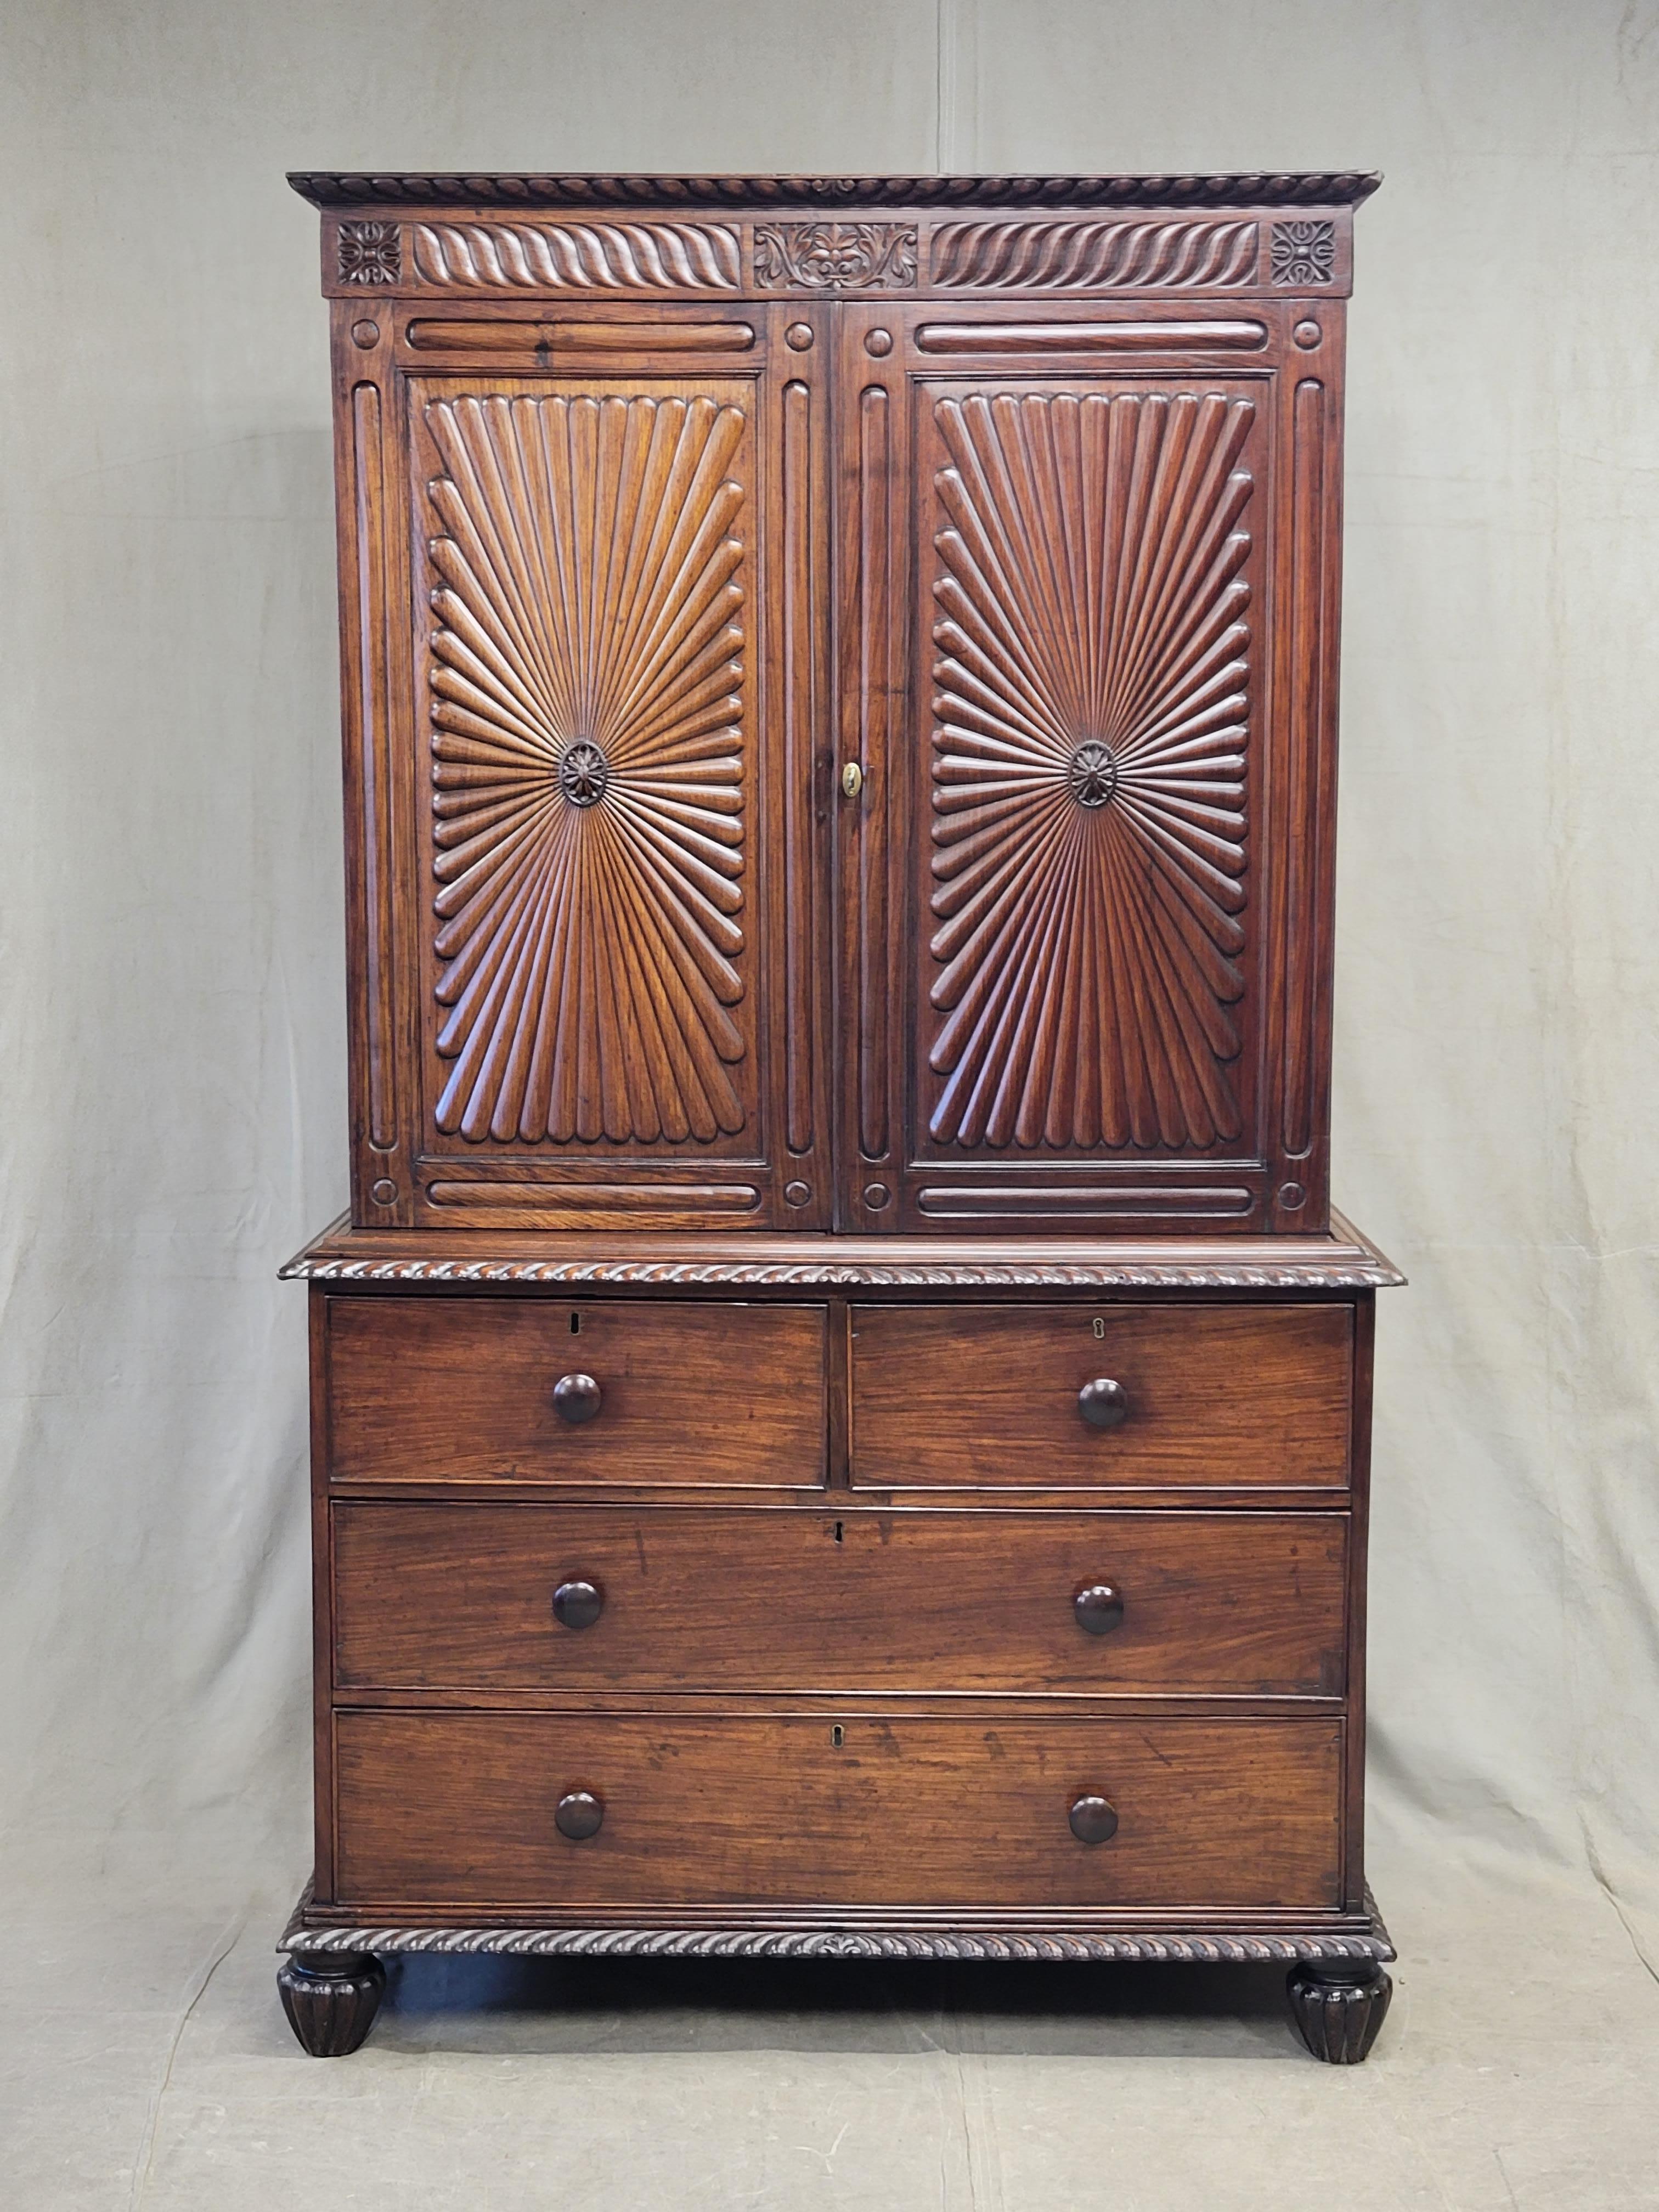 An absolutely stunning antique mid to late 19th century Anglo-Indian British colonial rosewood linen press cabinet. The rosewood just glows! A carved starburst pattern adorns the doors and a gorgeous carved gadrooned pattern is on the top, middle